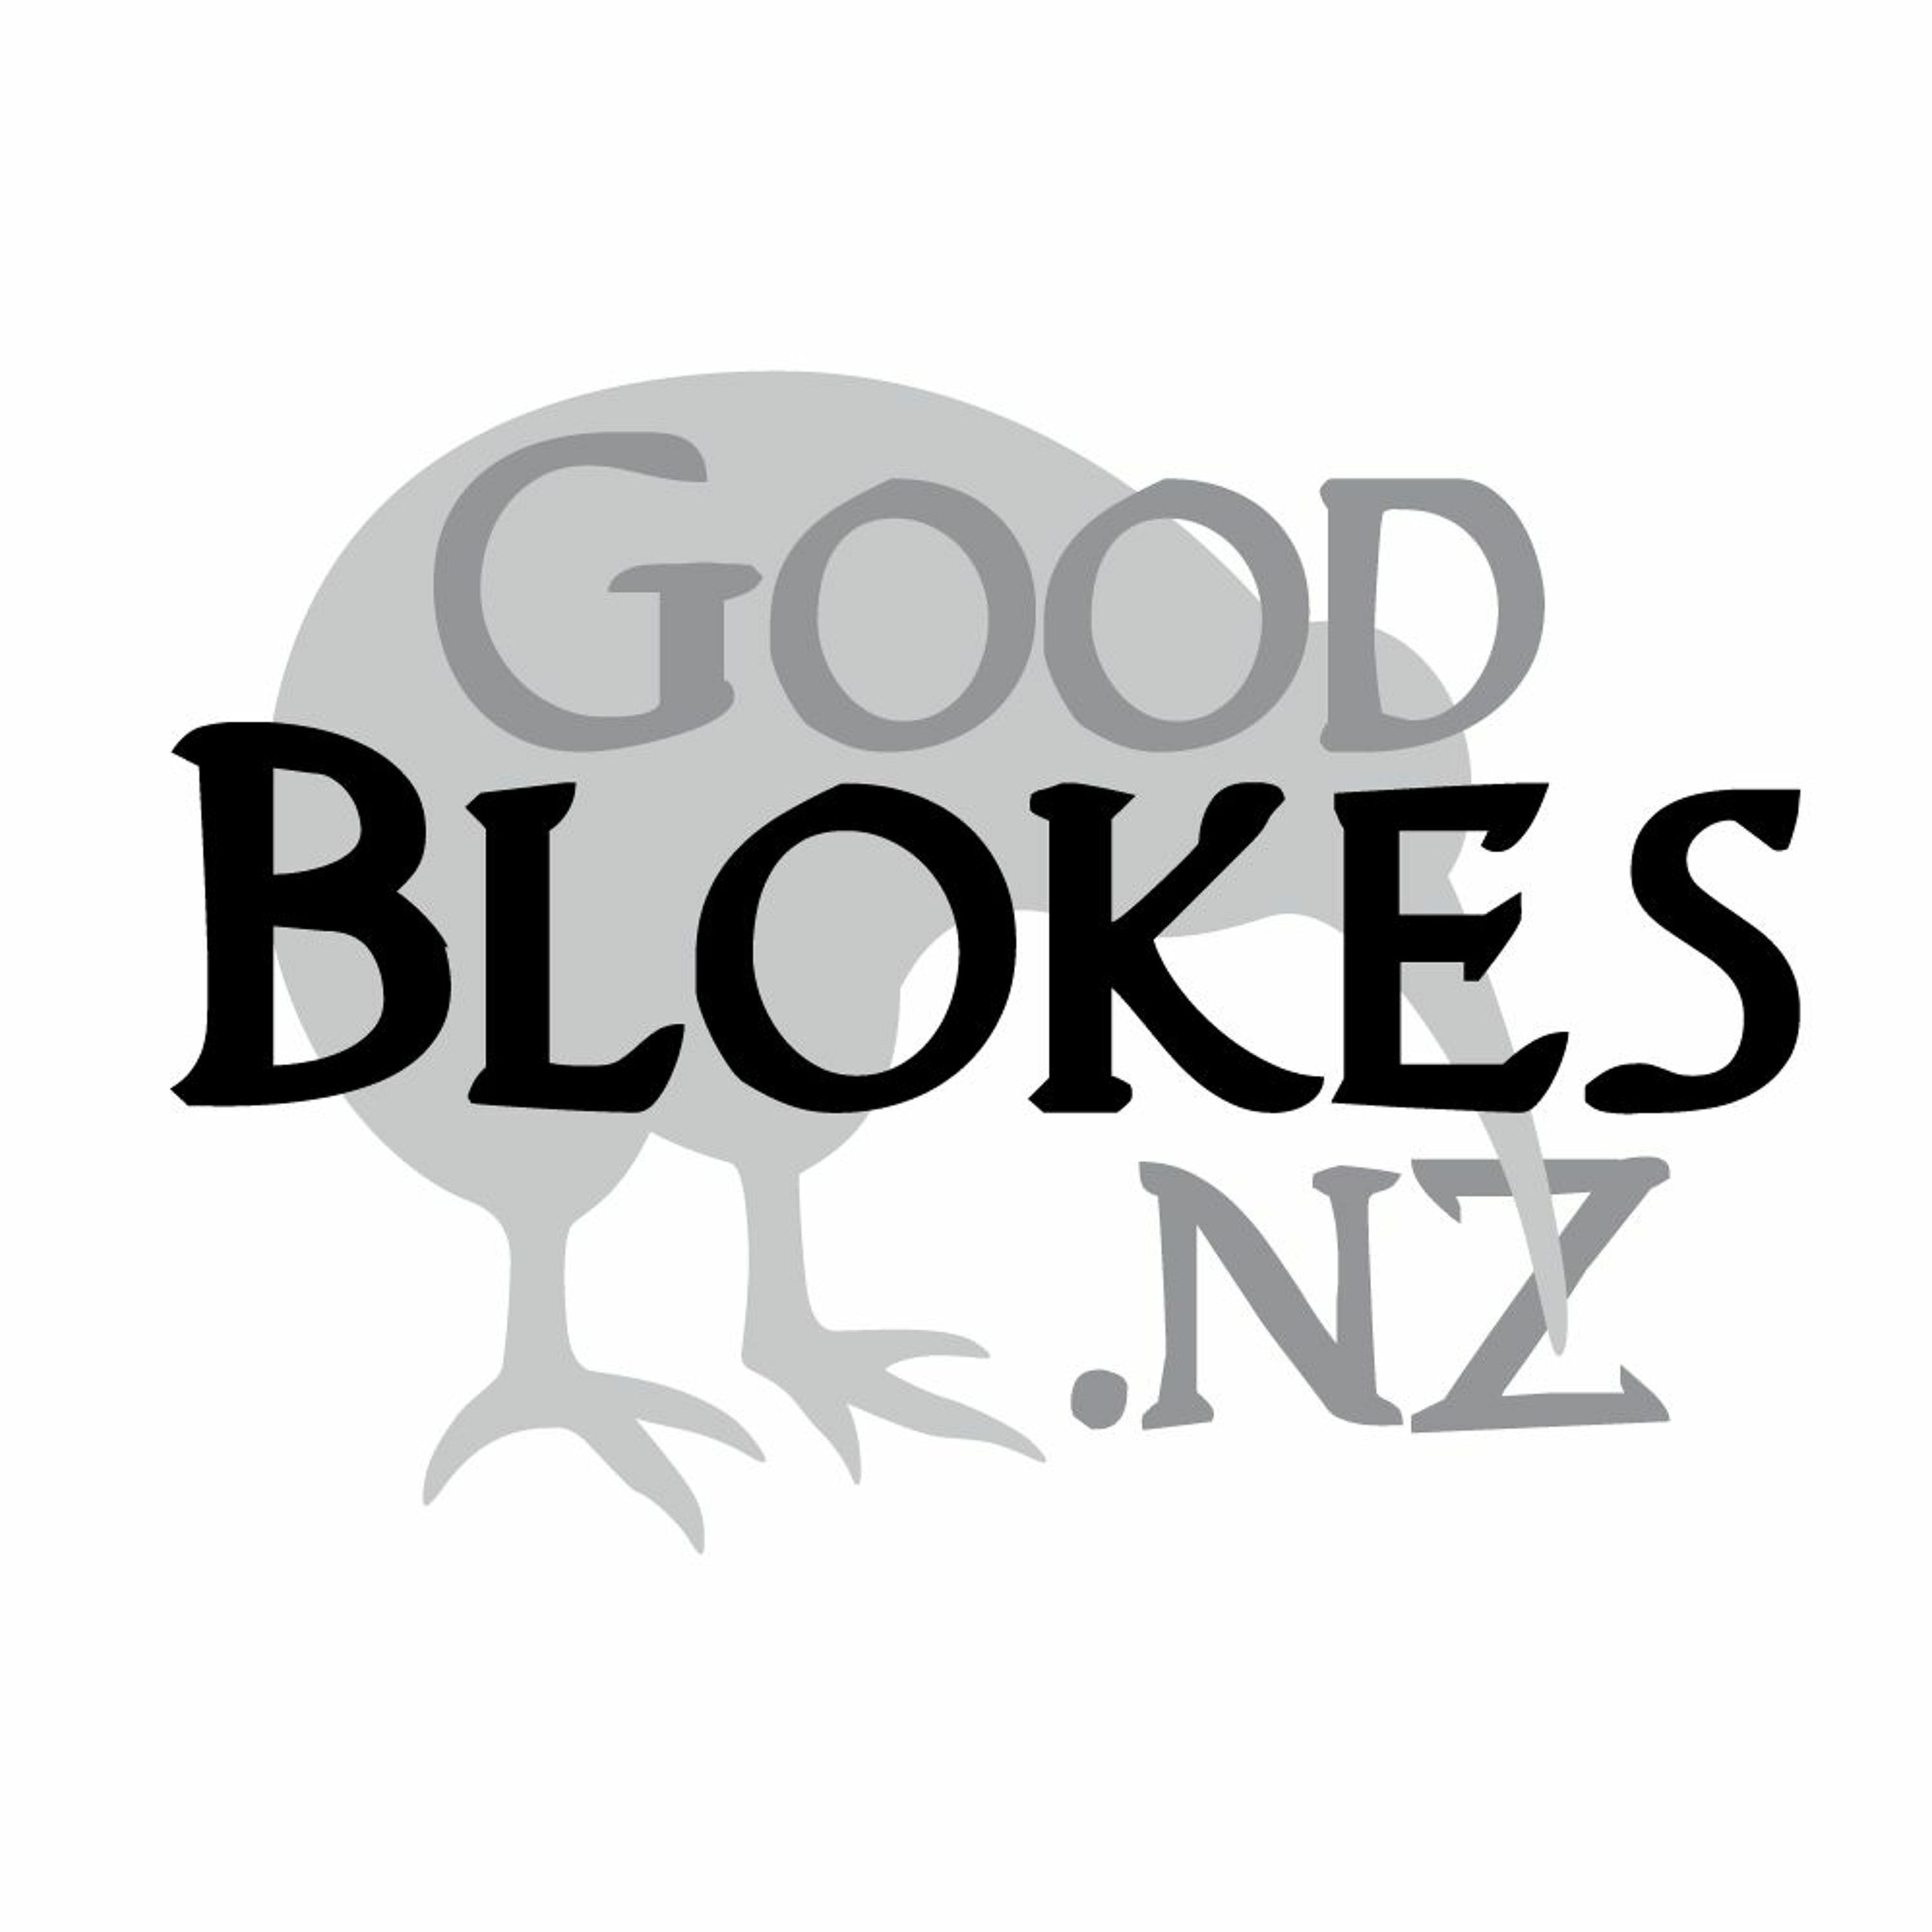 Good Blokes - Mike from goodblokes.co